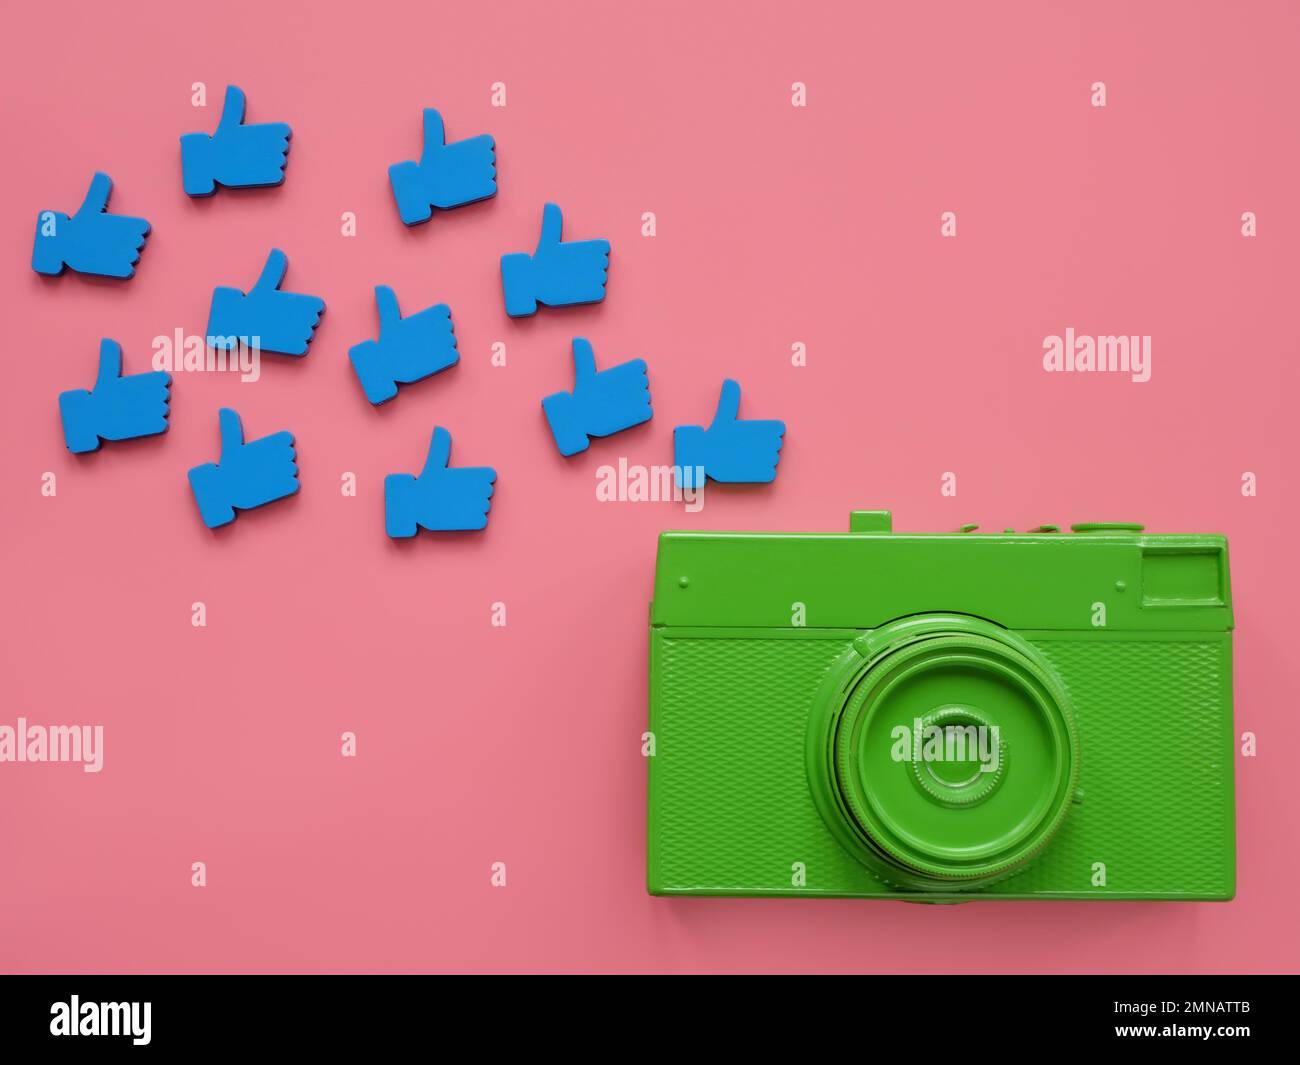 Camera and likes as symbol of modern lifestyle, popularity and social media. Stock Photo